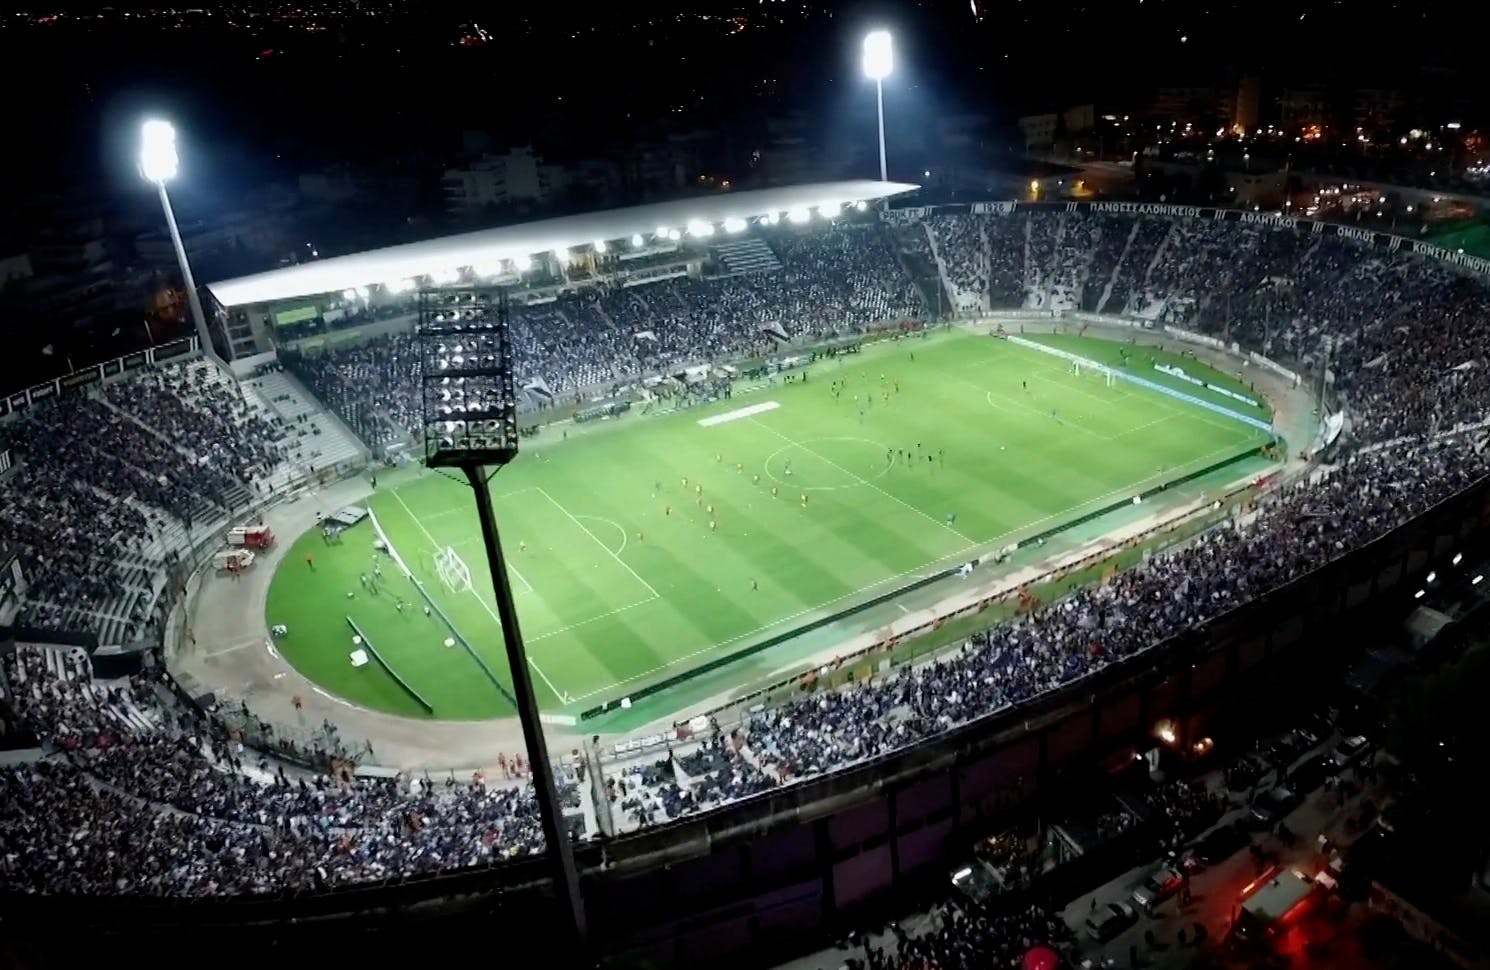 Birds eye view of a soccer field stadium filled with fans, soccer teams, and lights